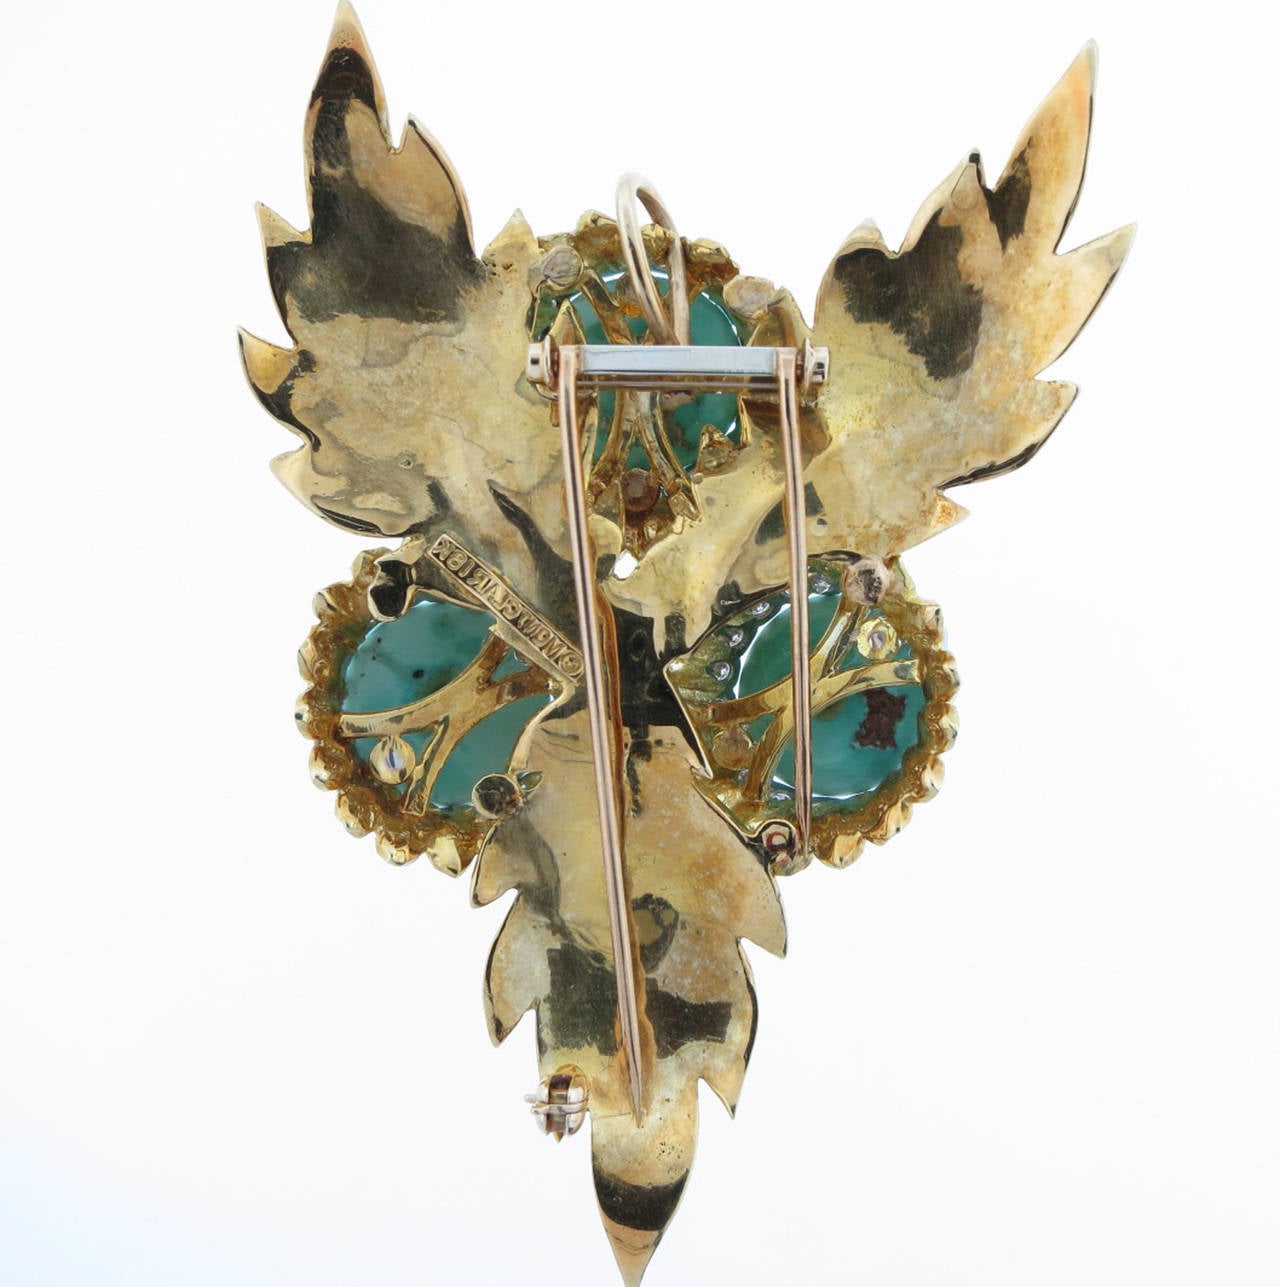 Perfect for summer ! The mounting is 18kt. yellow gold and designed in a floral  motif. Each turquoise measures 13. mm. and is surrounded in white gold and bead set with 19 round brilliant cut diamonds. Total diamond weight approx .65cts. The brooch